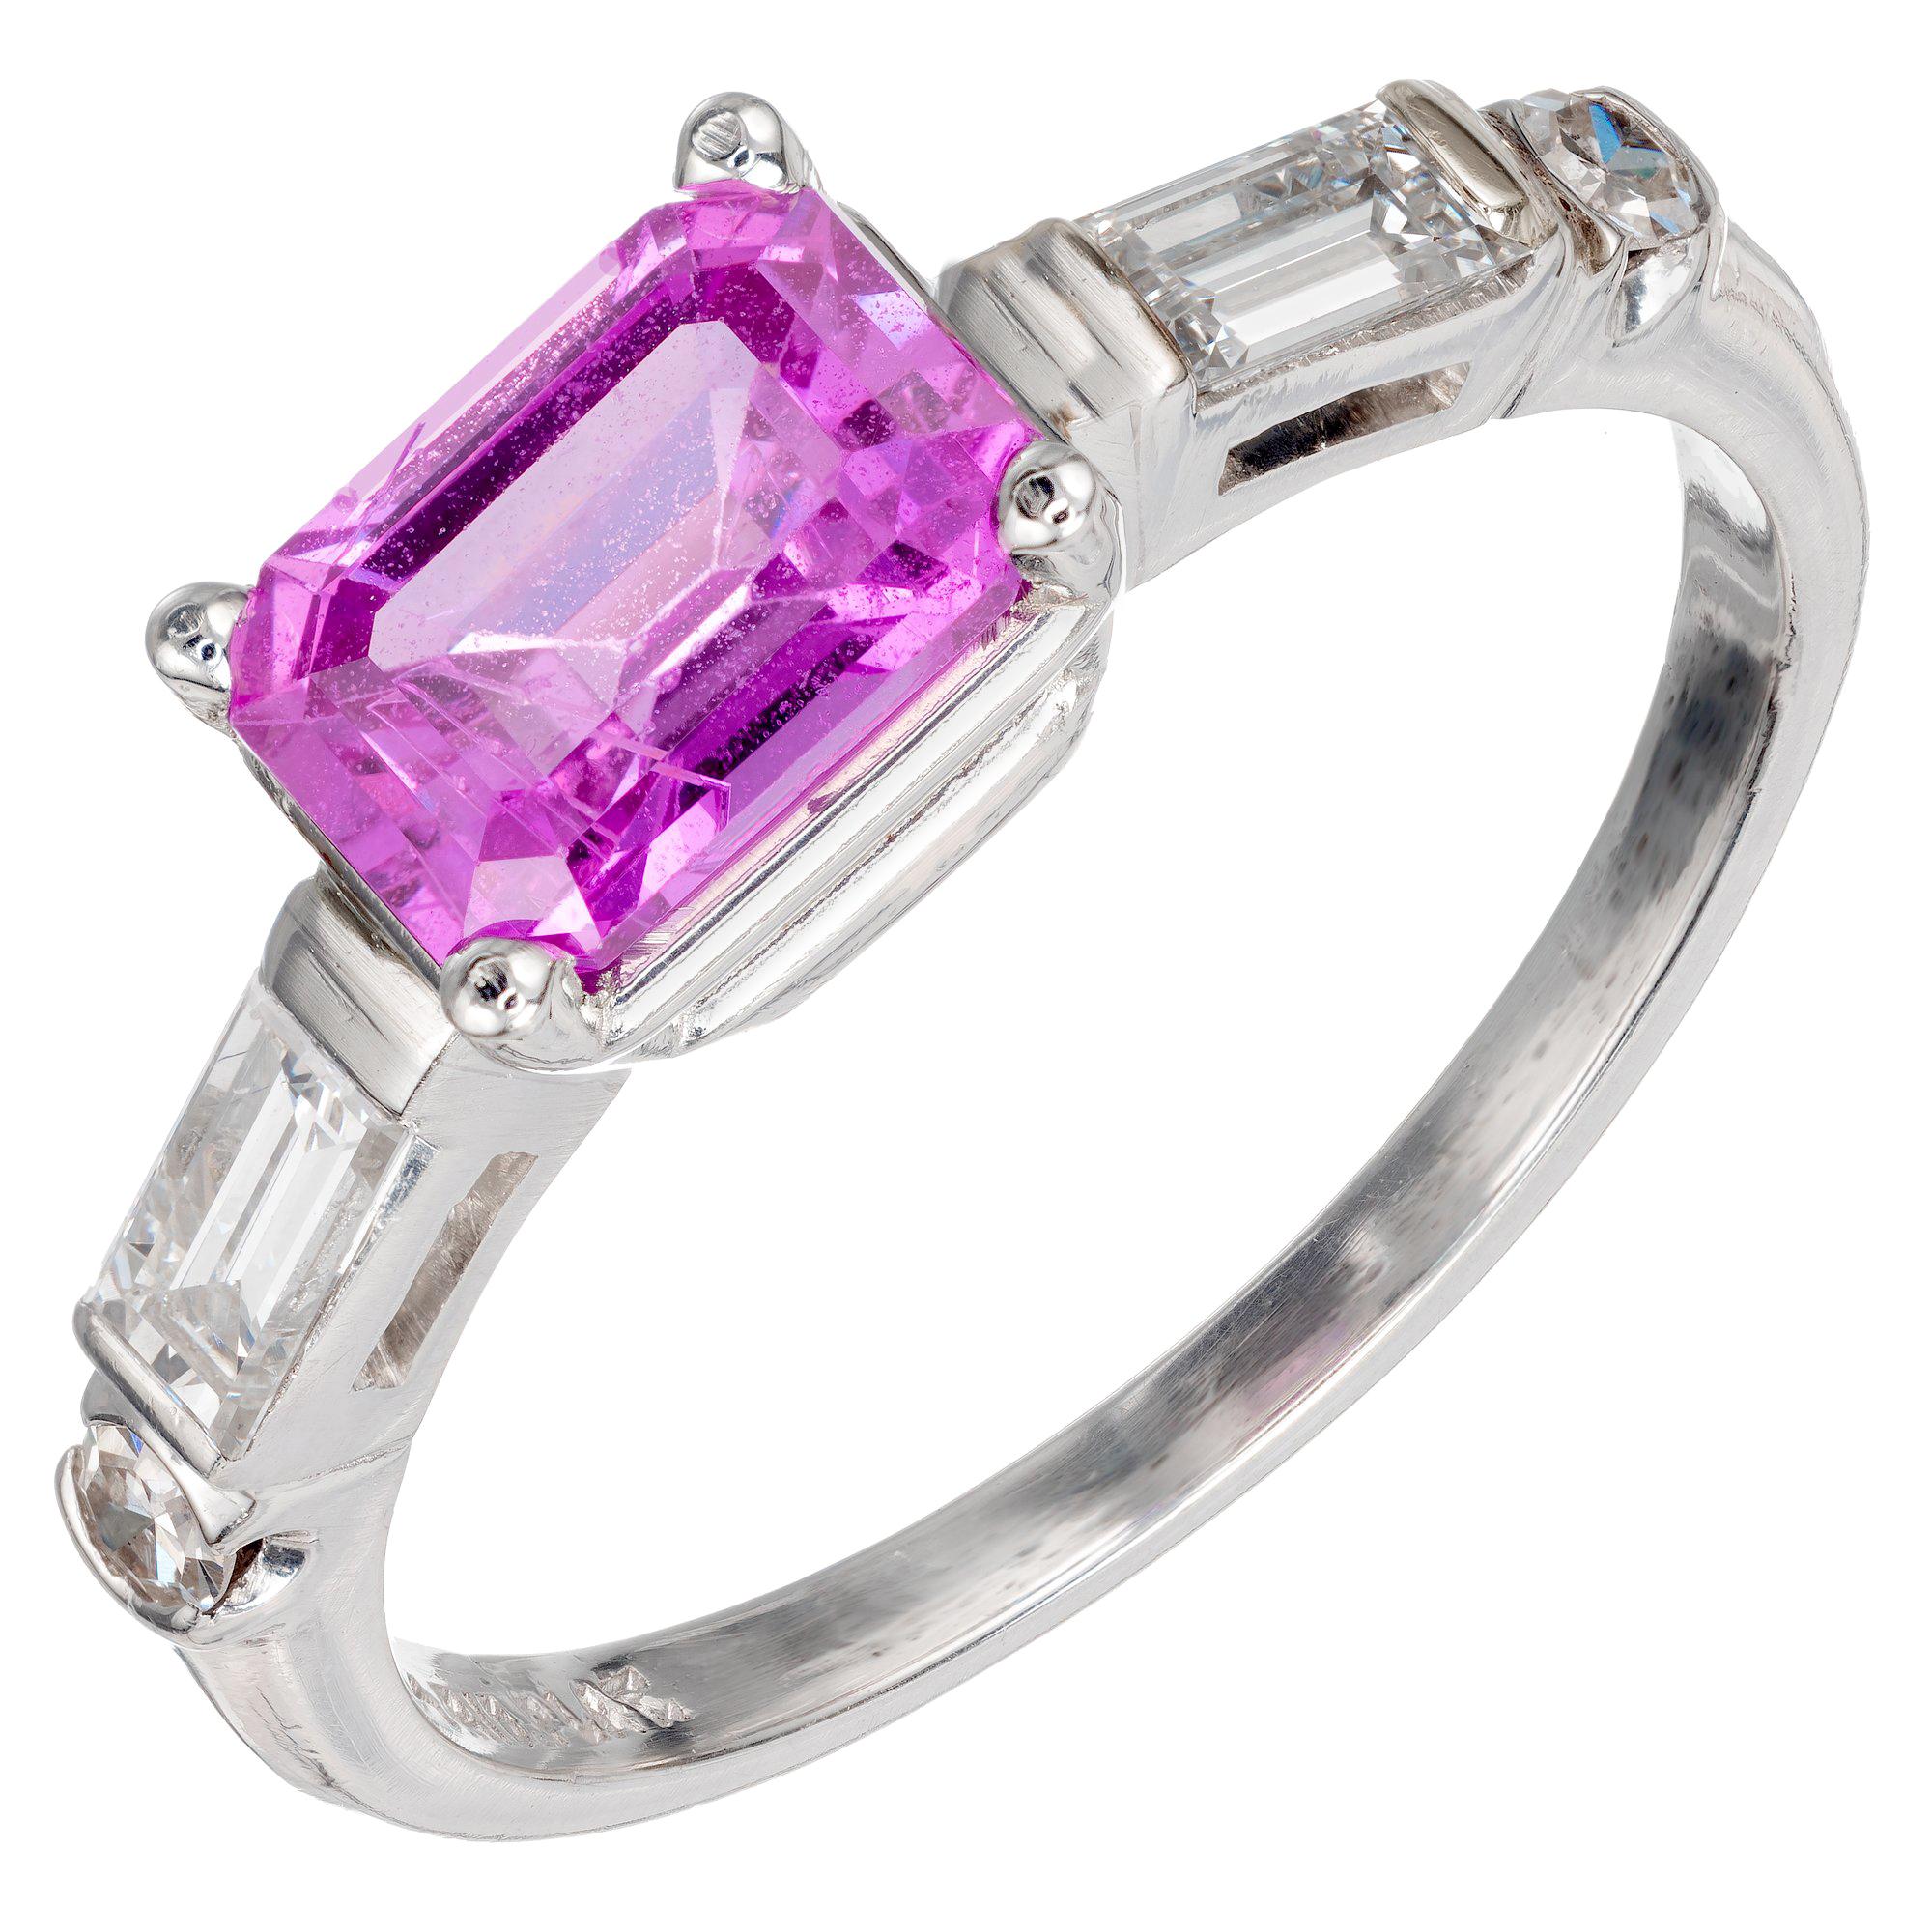 GIA Certified 1.49 Carat Purple Pink Sapphire Diamond Platinum Engagement Ring For Sale